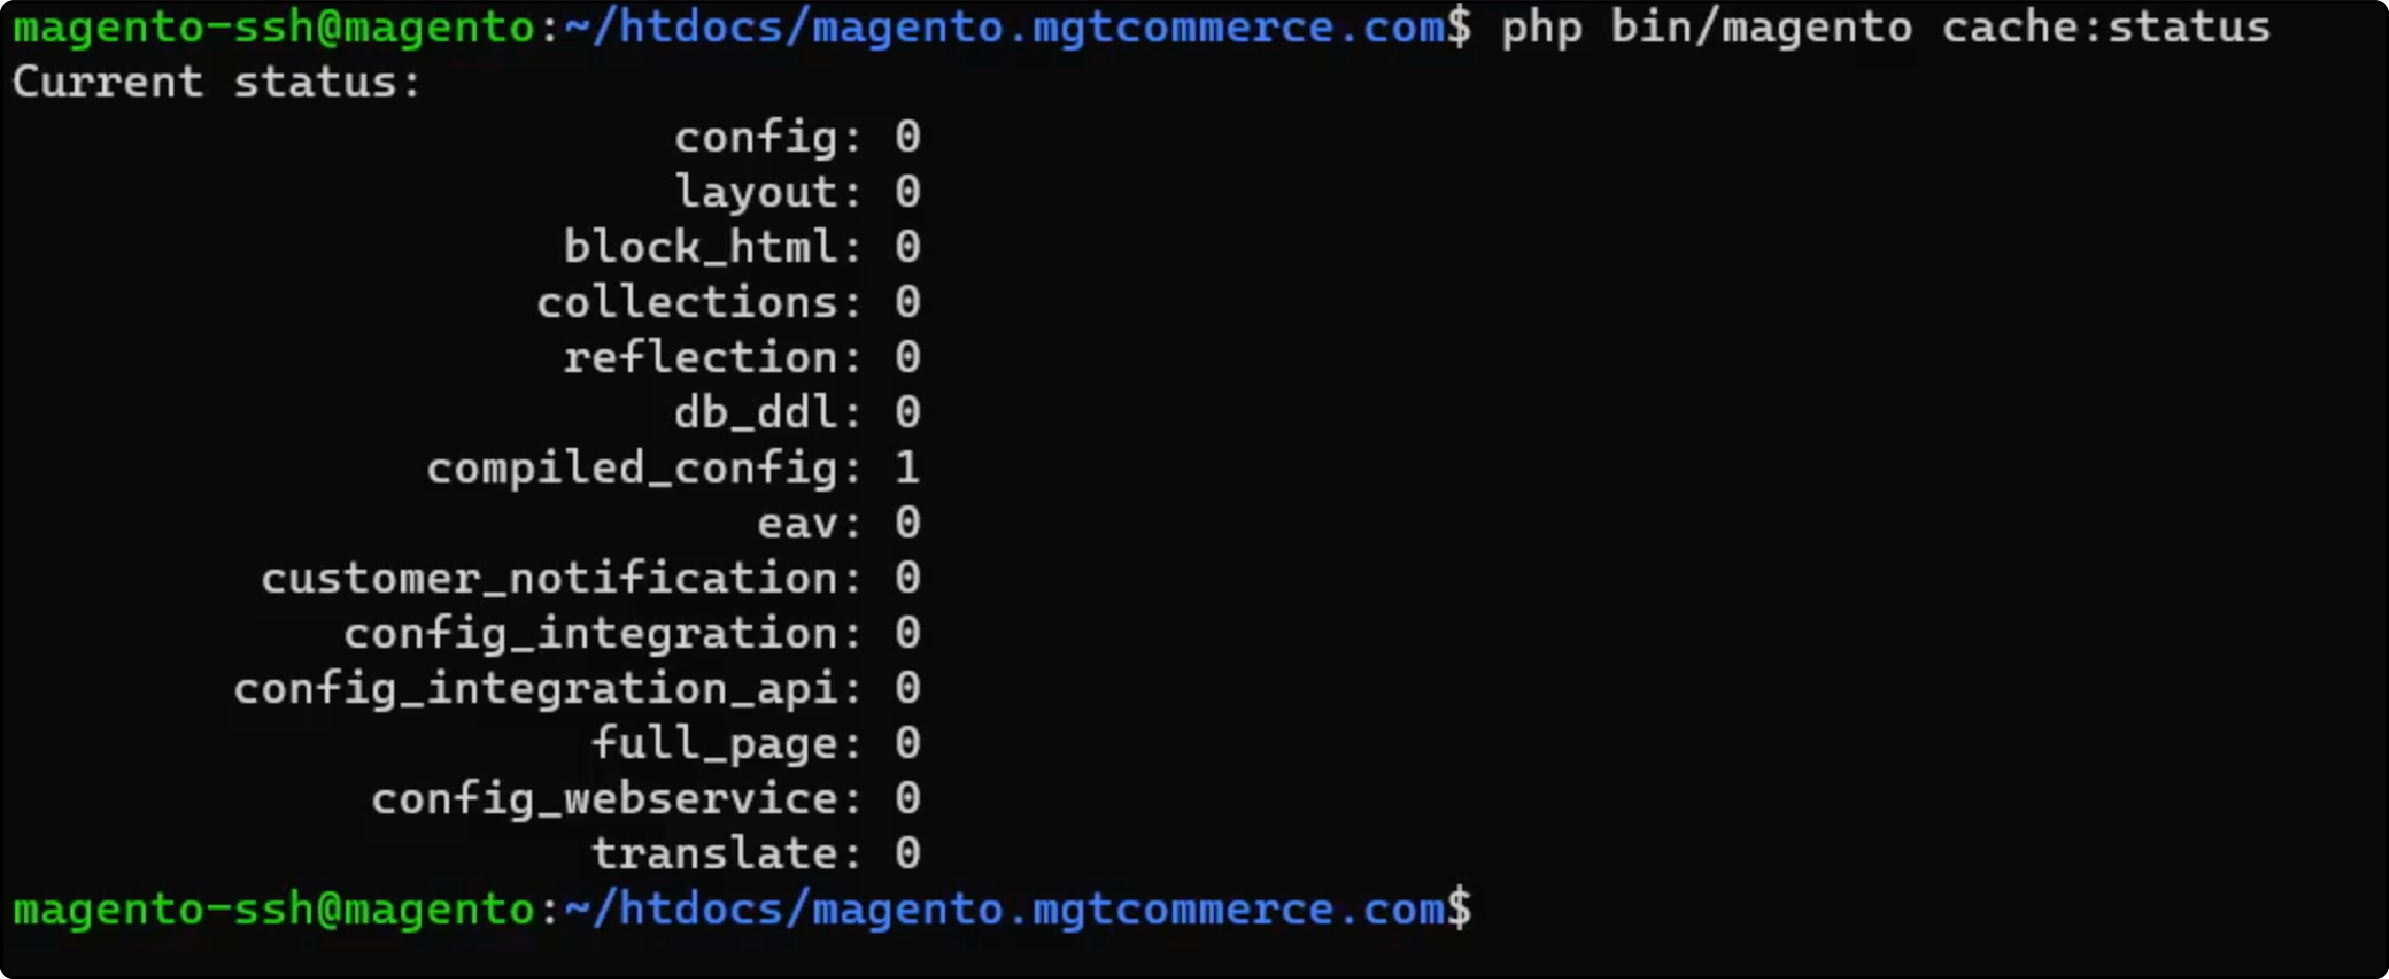 Displaying Cache Status in Magento 2 Using Command Line Interface